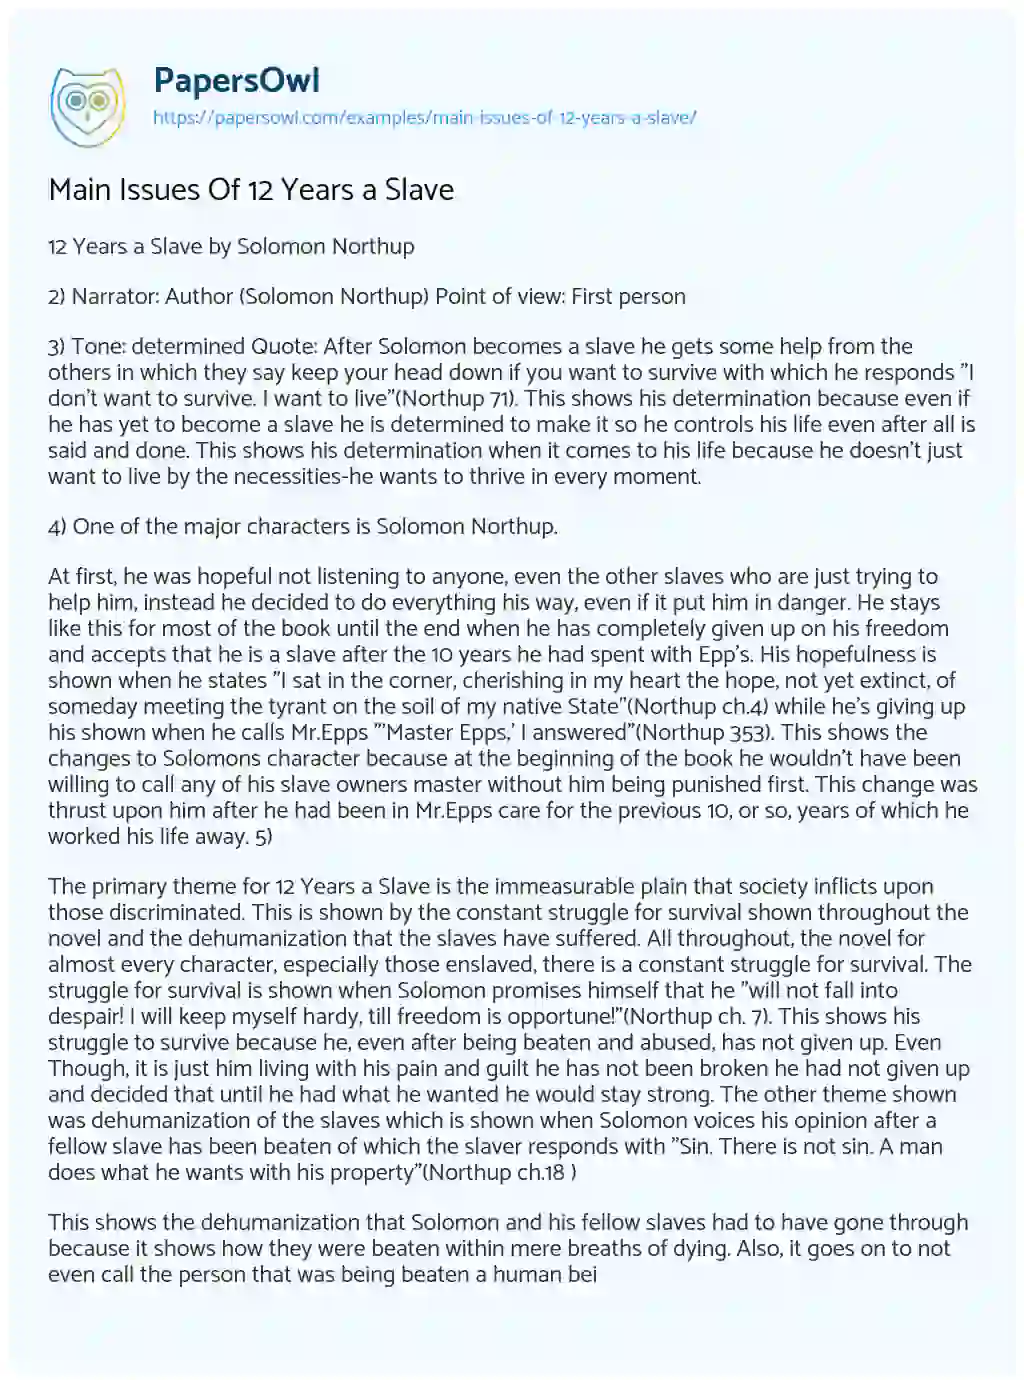 Essay on Main Issues of 12 Years a Slave